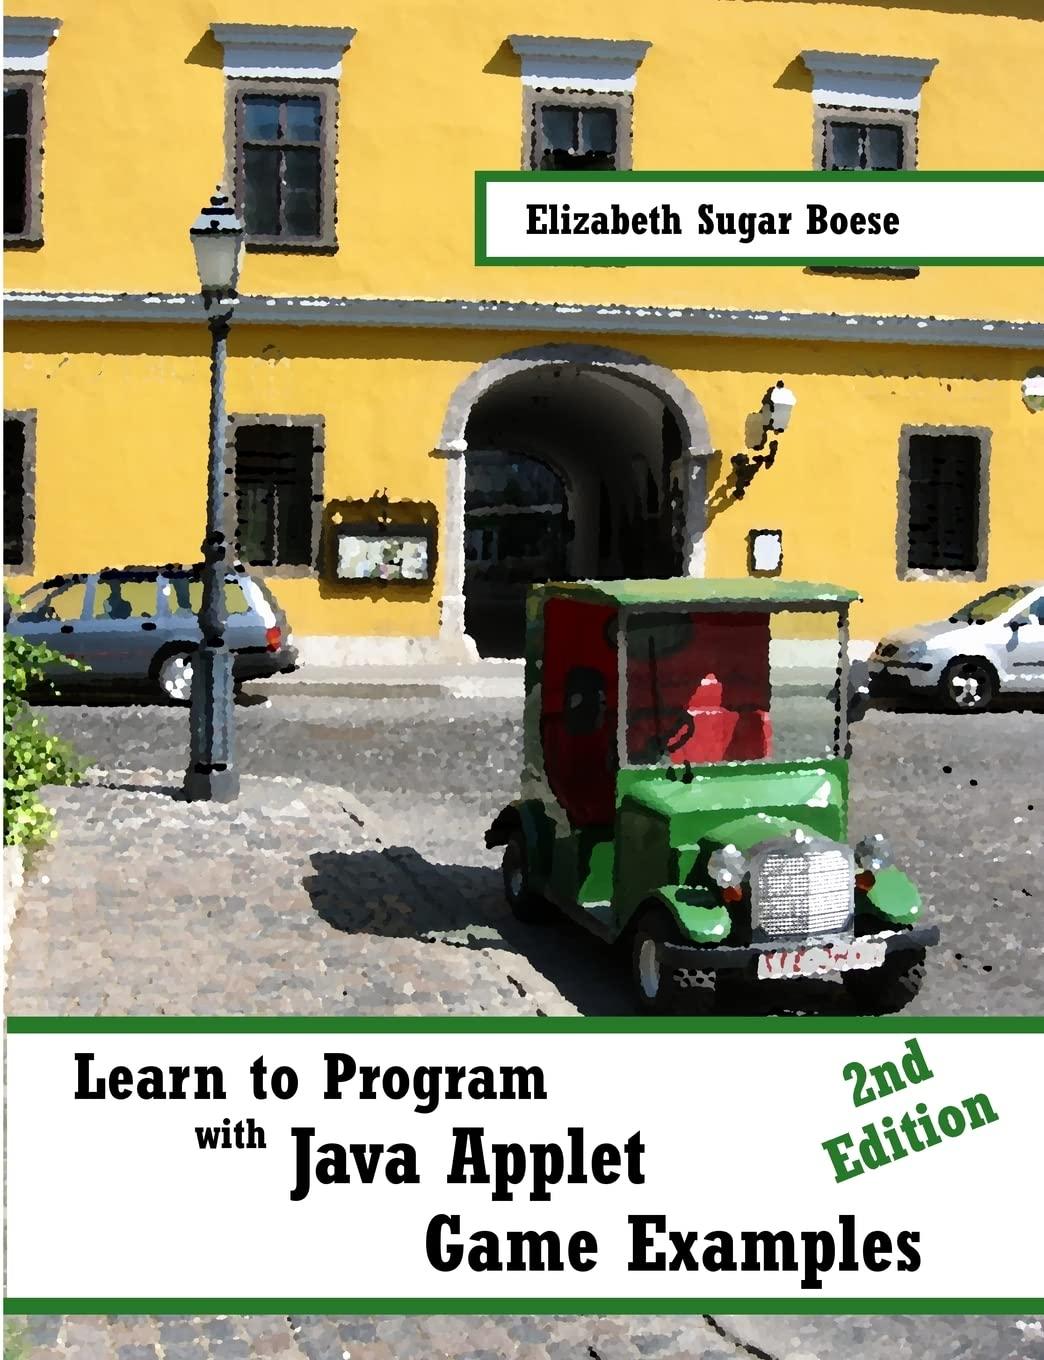 learn to program with java applet game examples 2nd edition elizabeth boese 0557632153, 9780557632152